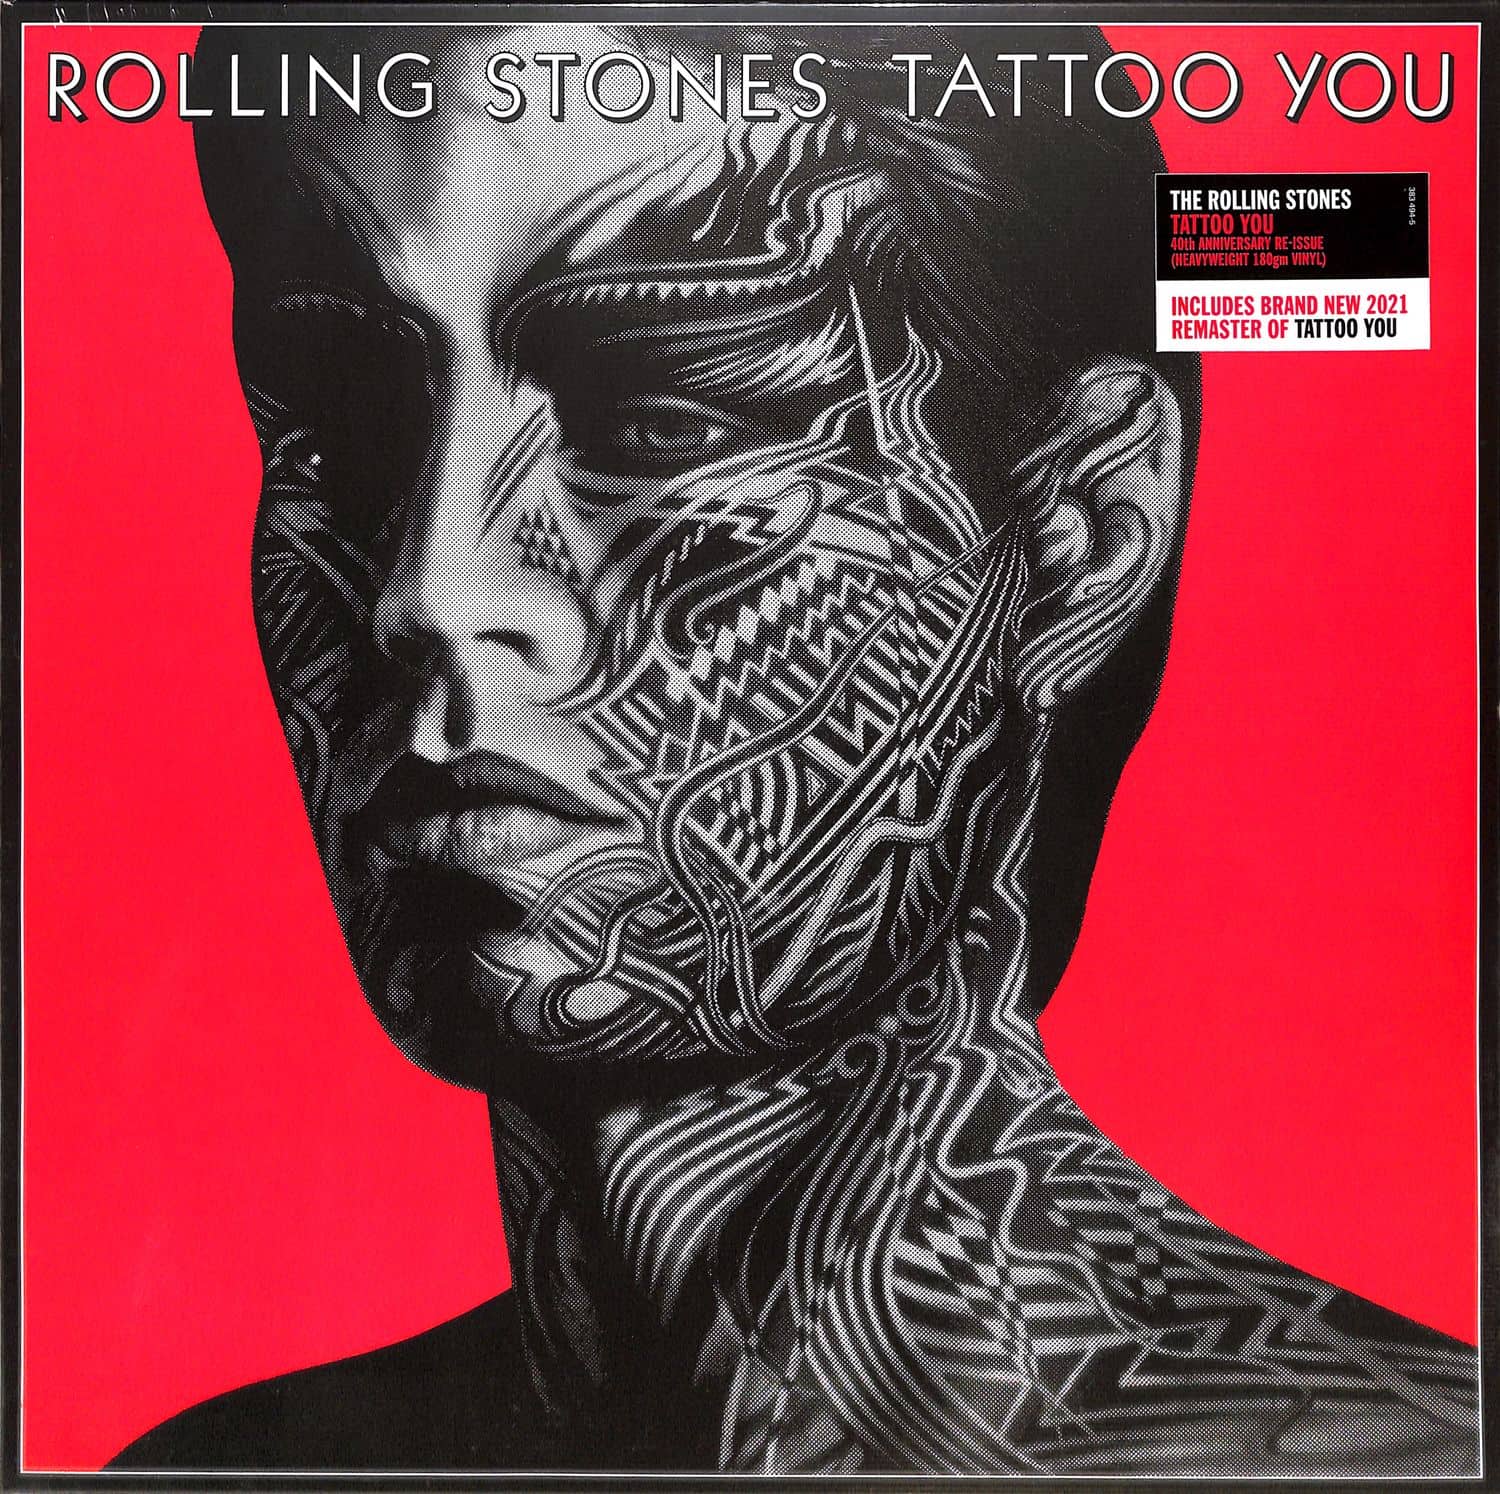 The Rolling Stones - TATTOO YOU - 40TH ANNIVERSARY 